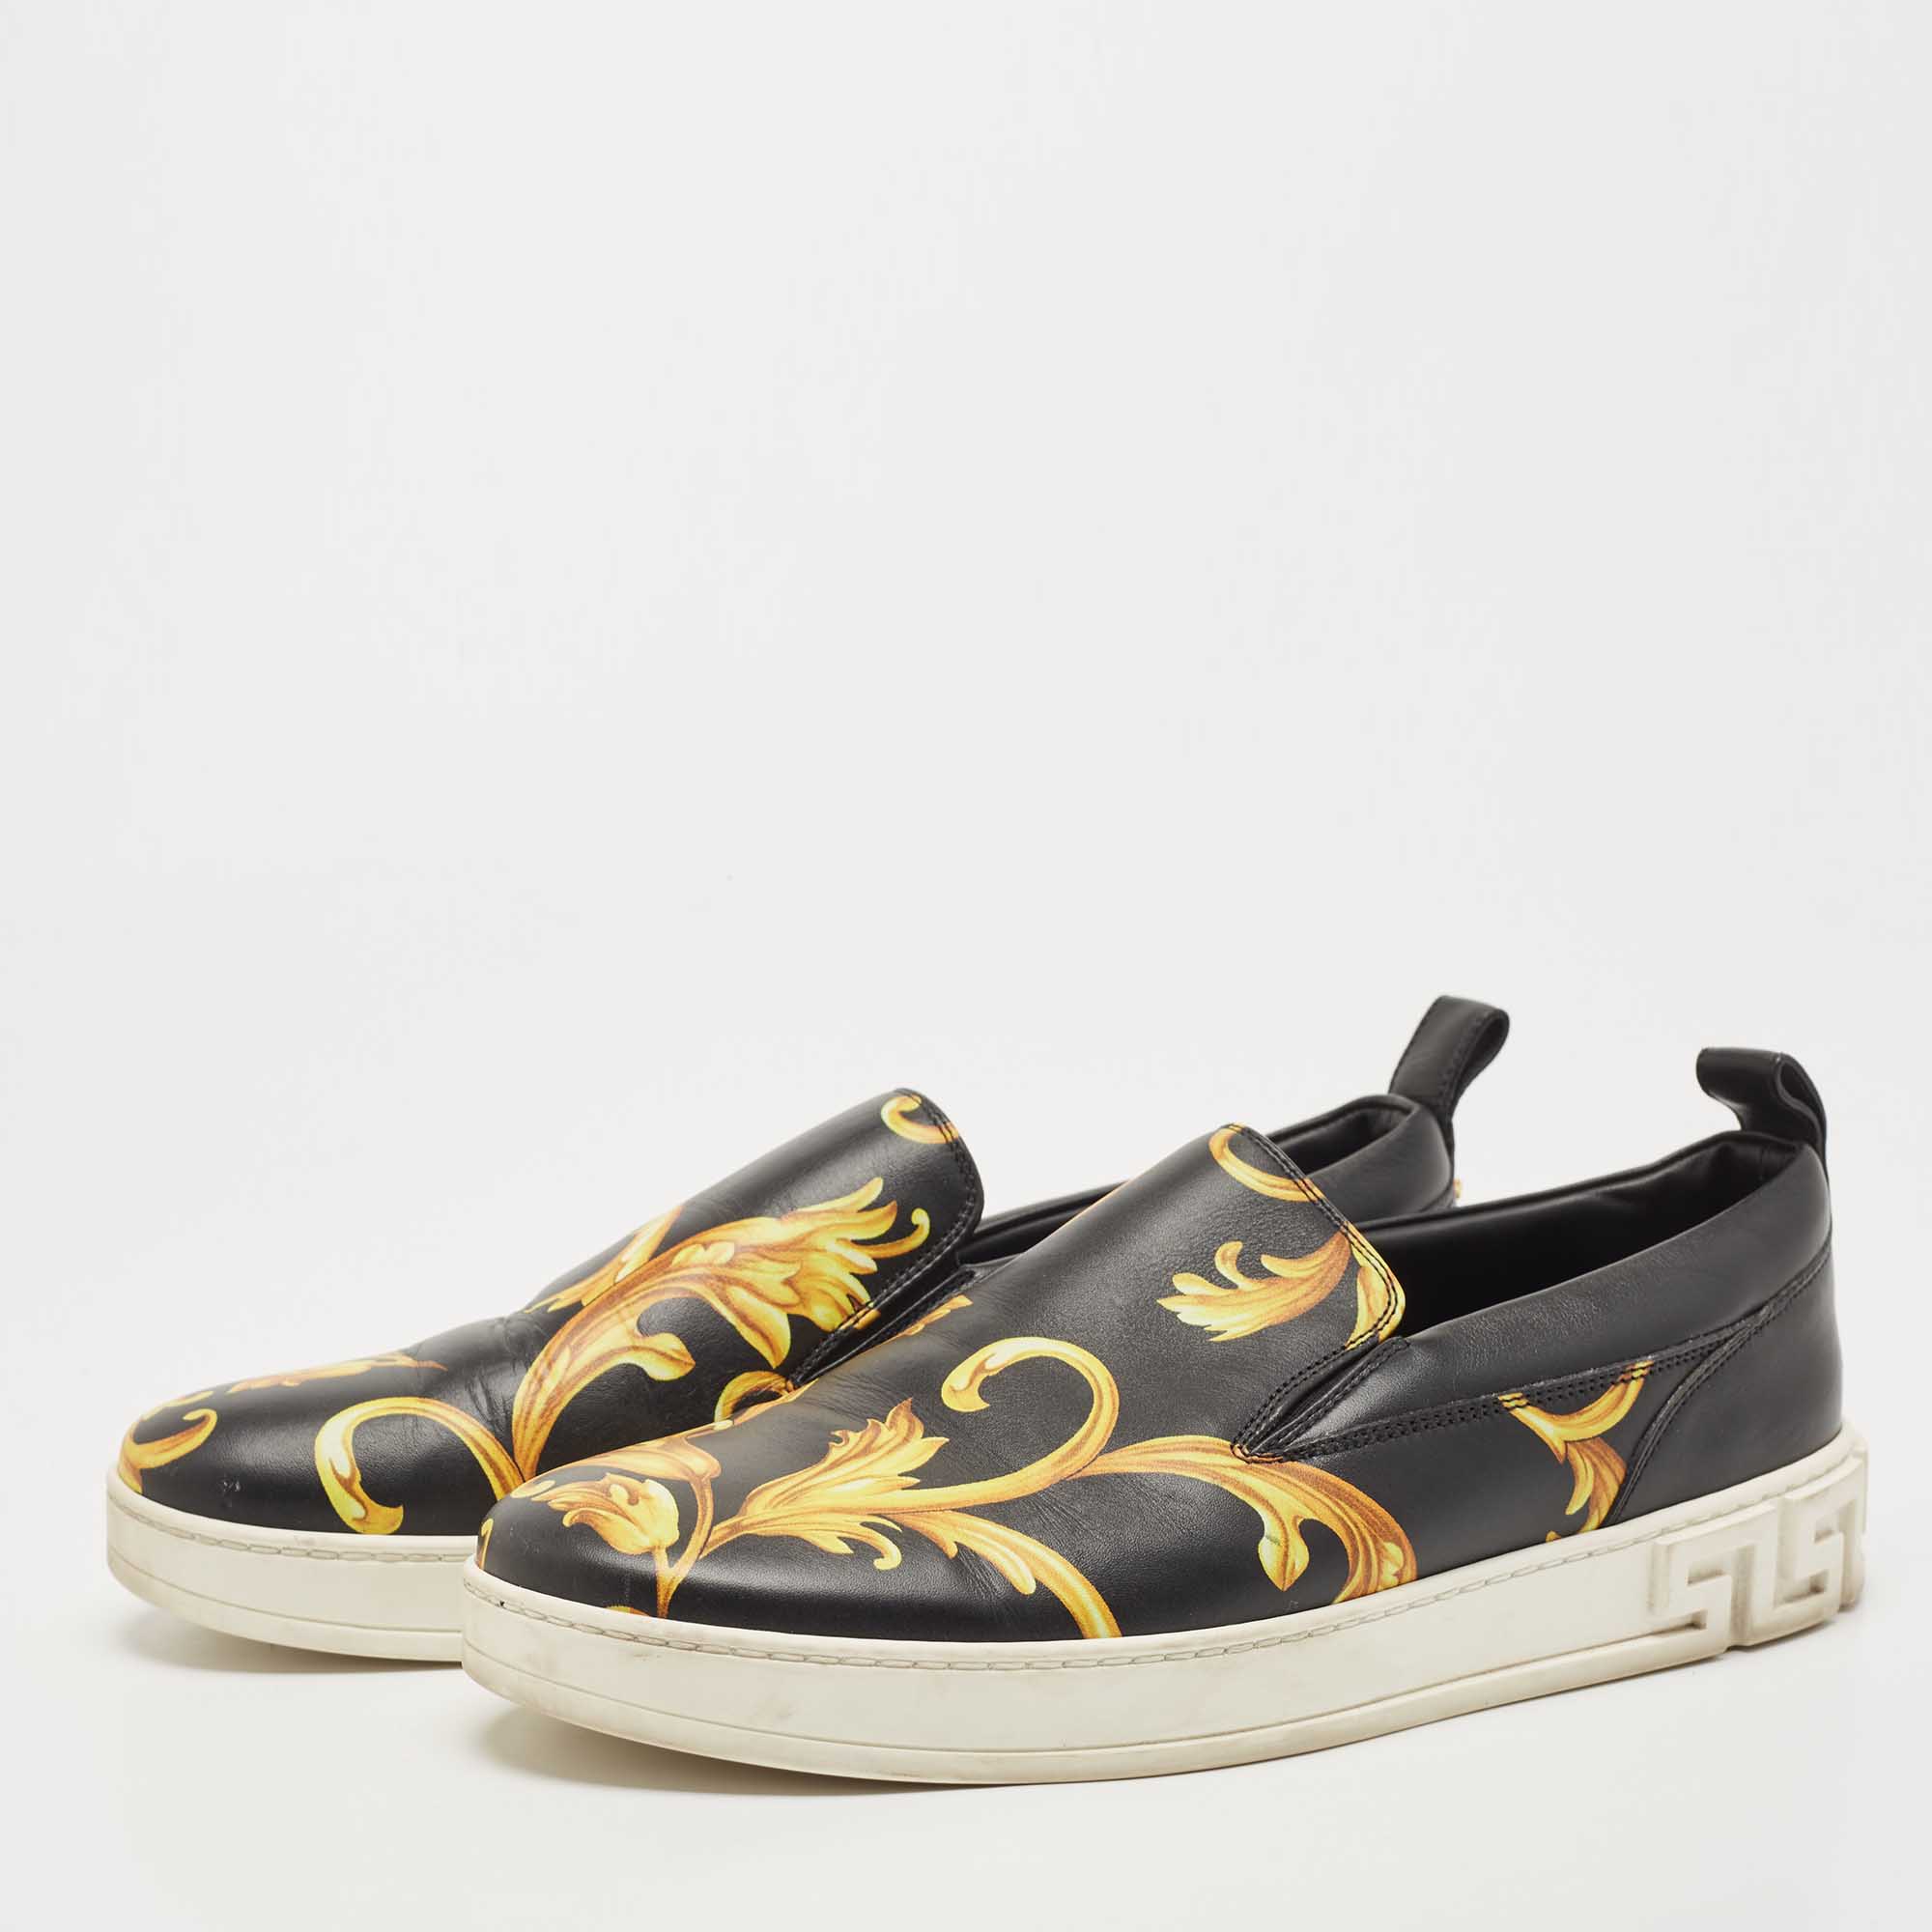 

Versace Black/Gold Barocco Printed Leather Slip On Sneakers Size